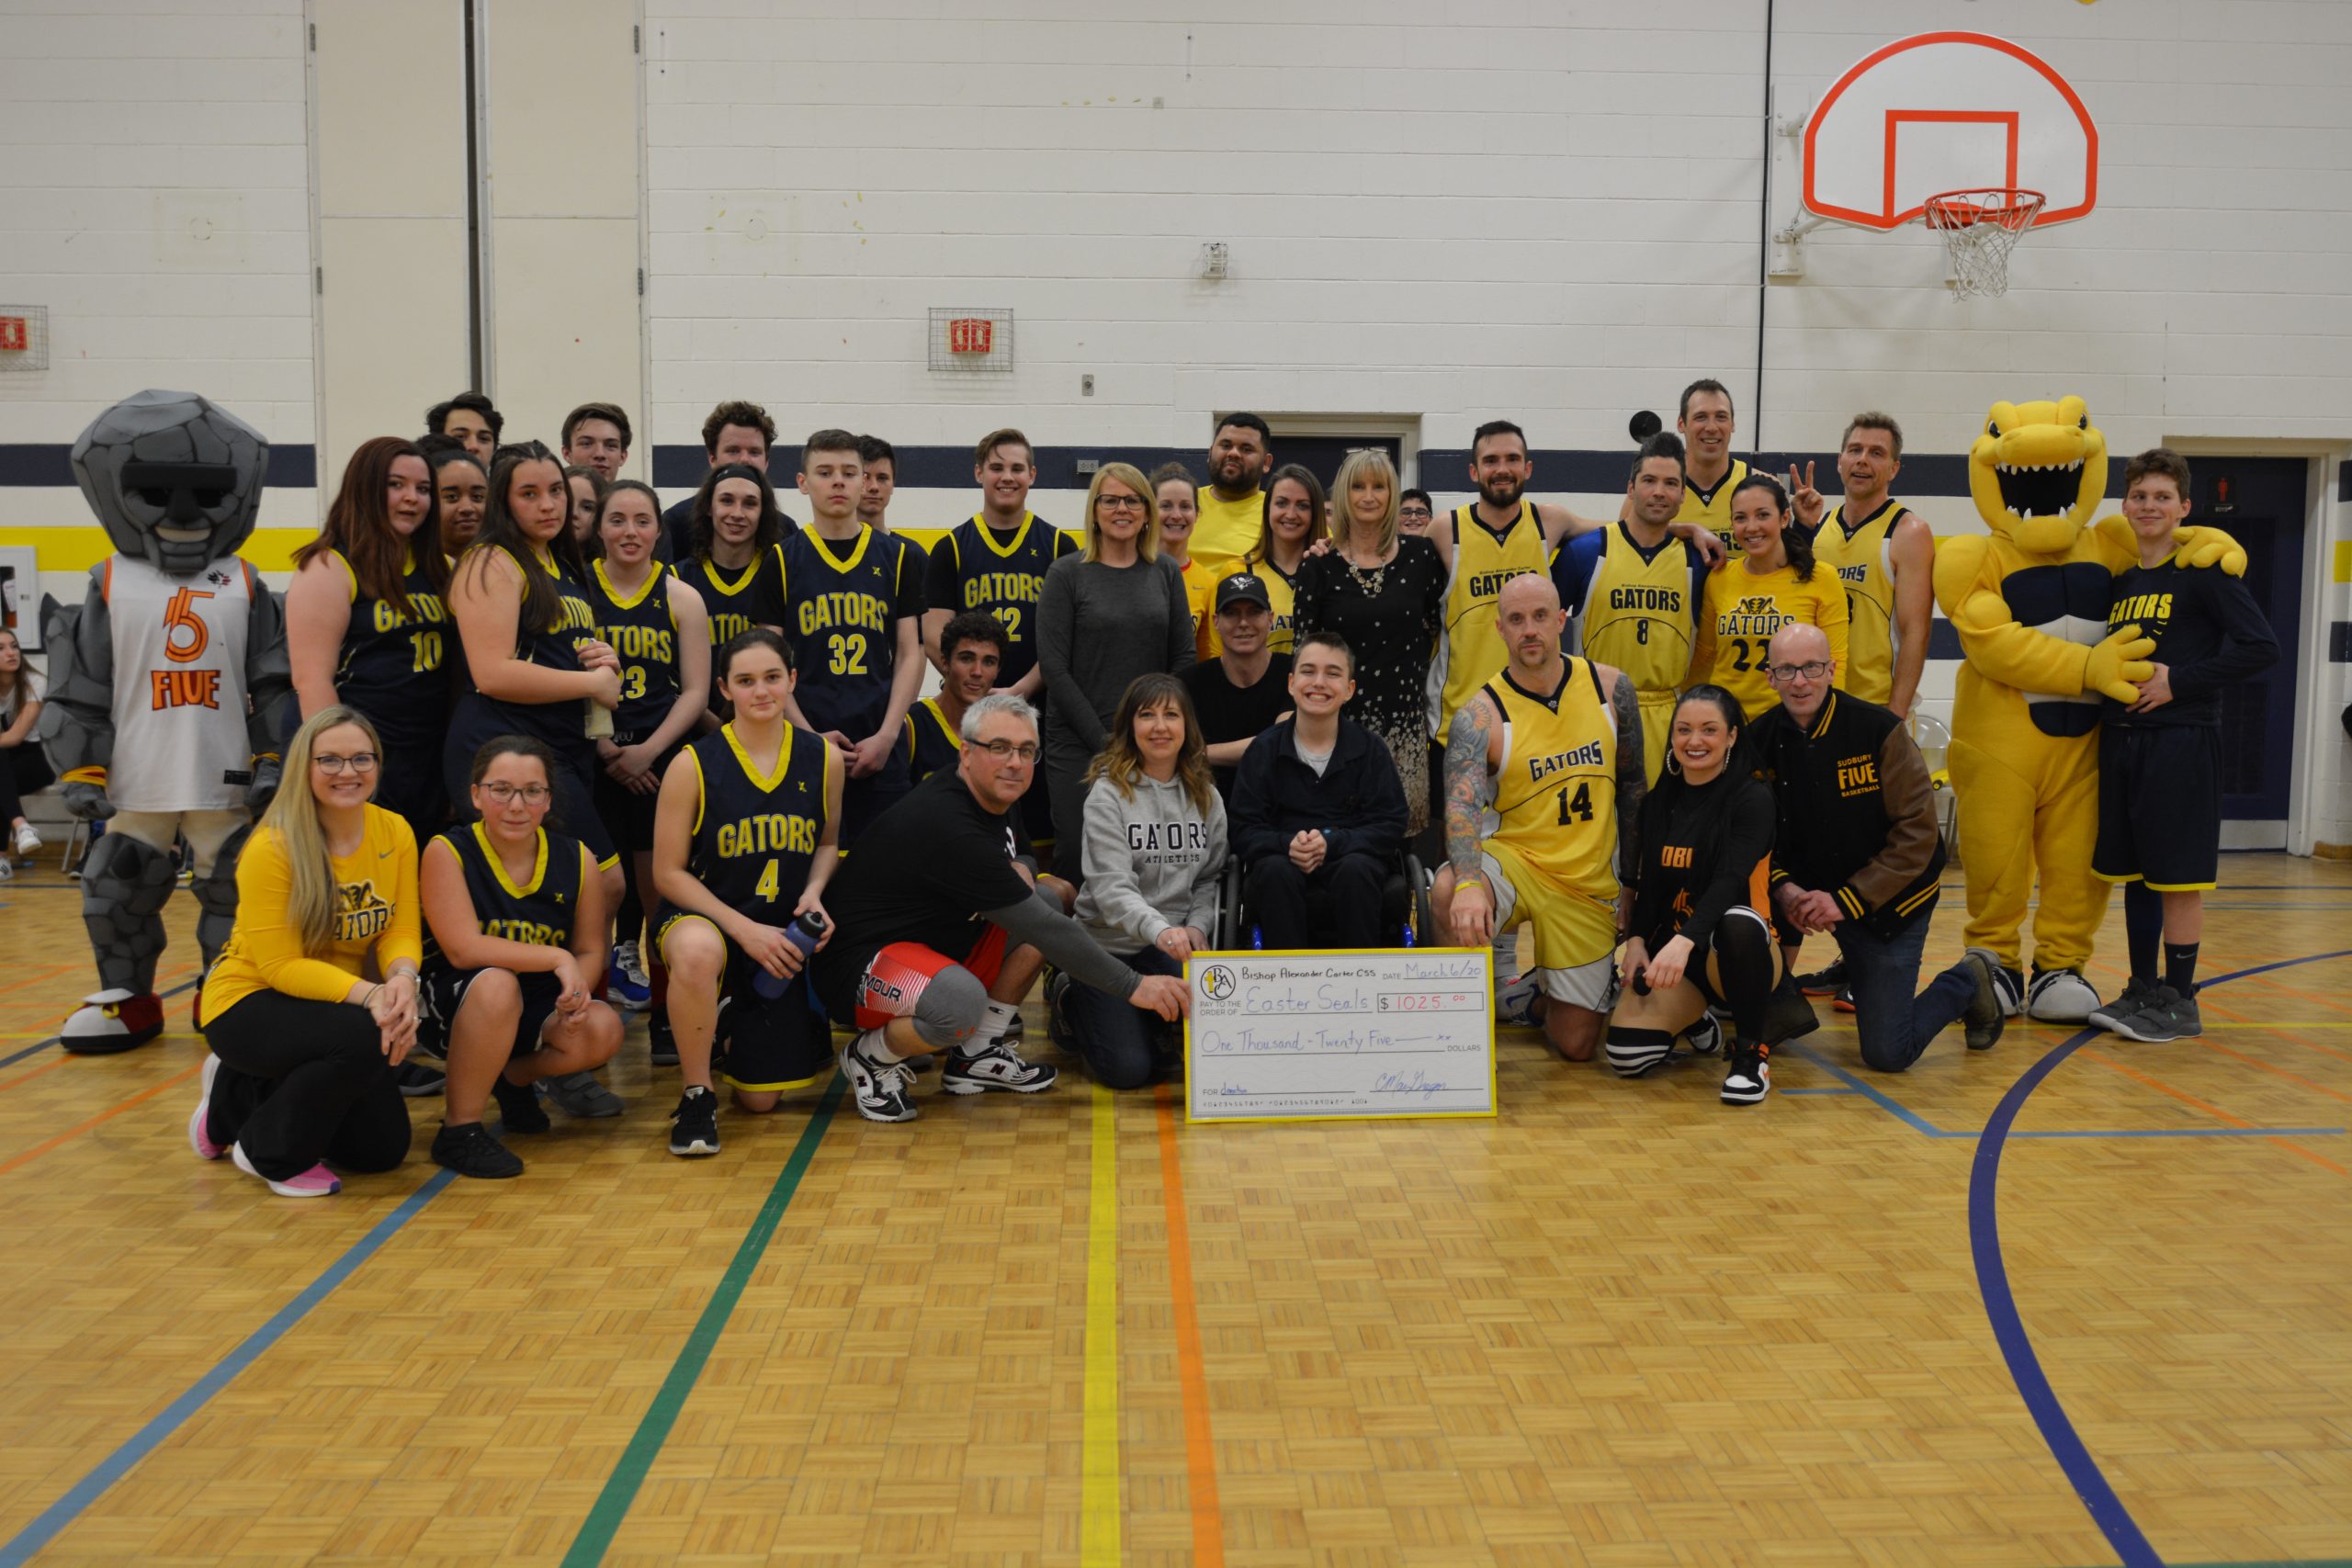 Group stands together with giant cheque